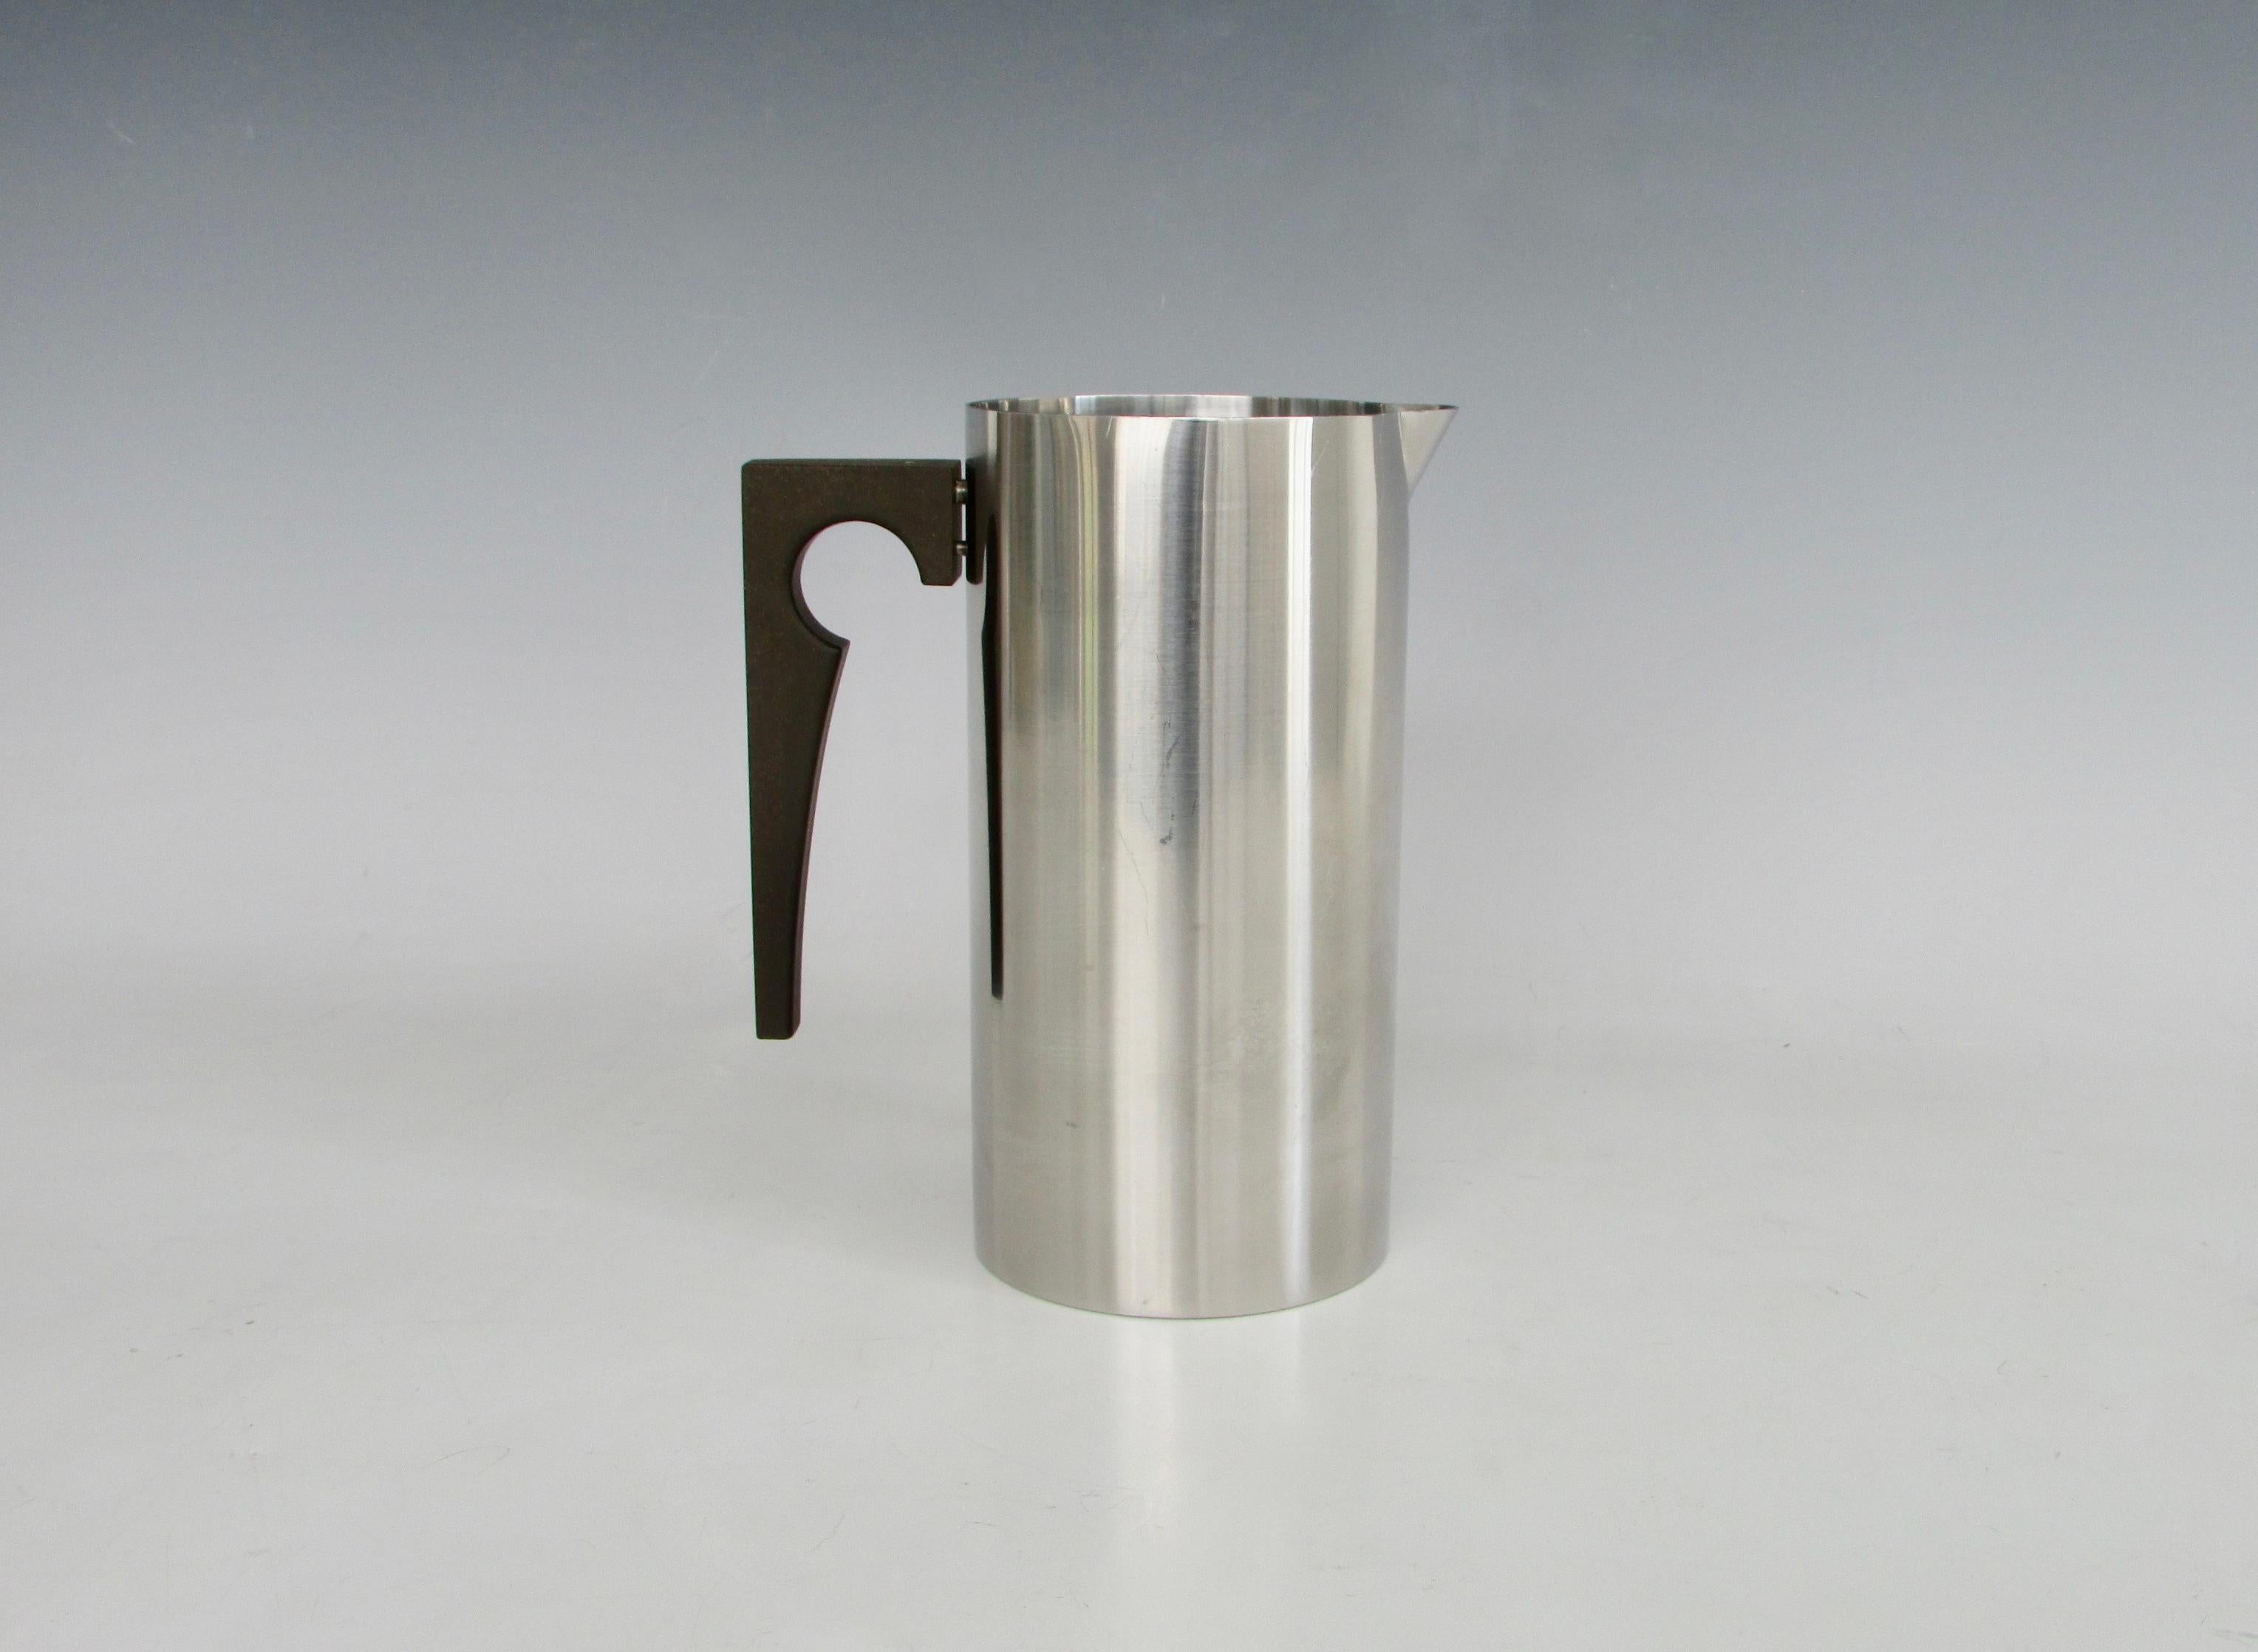 This Arne Jacobsen pitcher with ice lip by Stelton is part of the Cylinda Line hollowware range from 1967. The Cylinda line is both understated and functional Scandinavian design. A sharp and purposeful addition for any bar.
Measures 5.25 width with